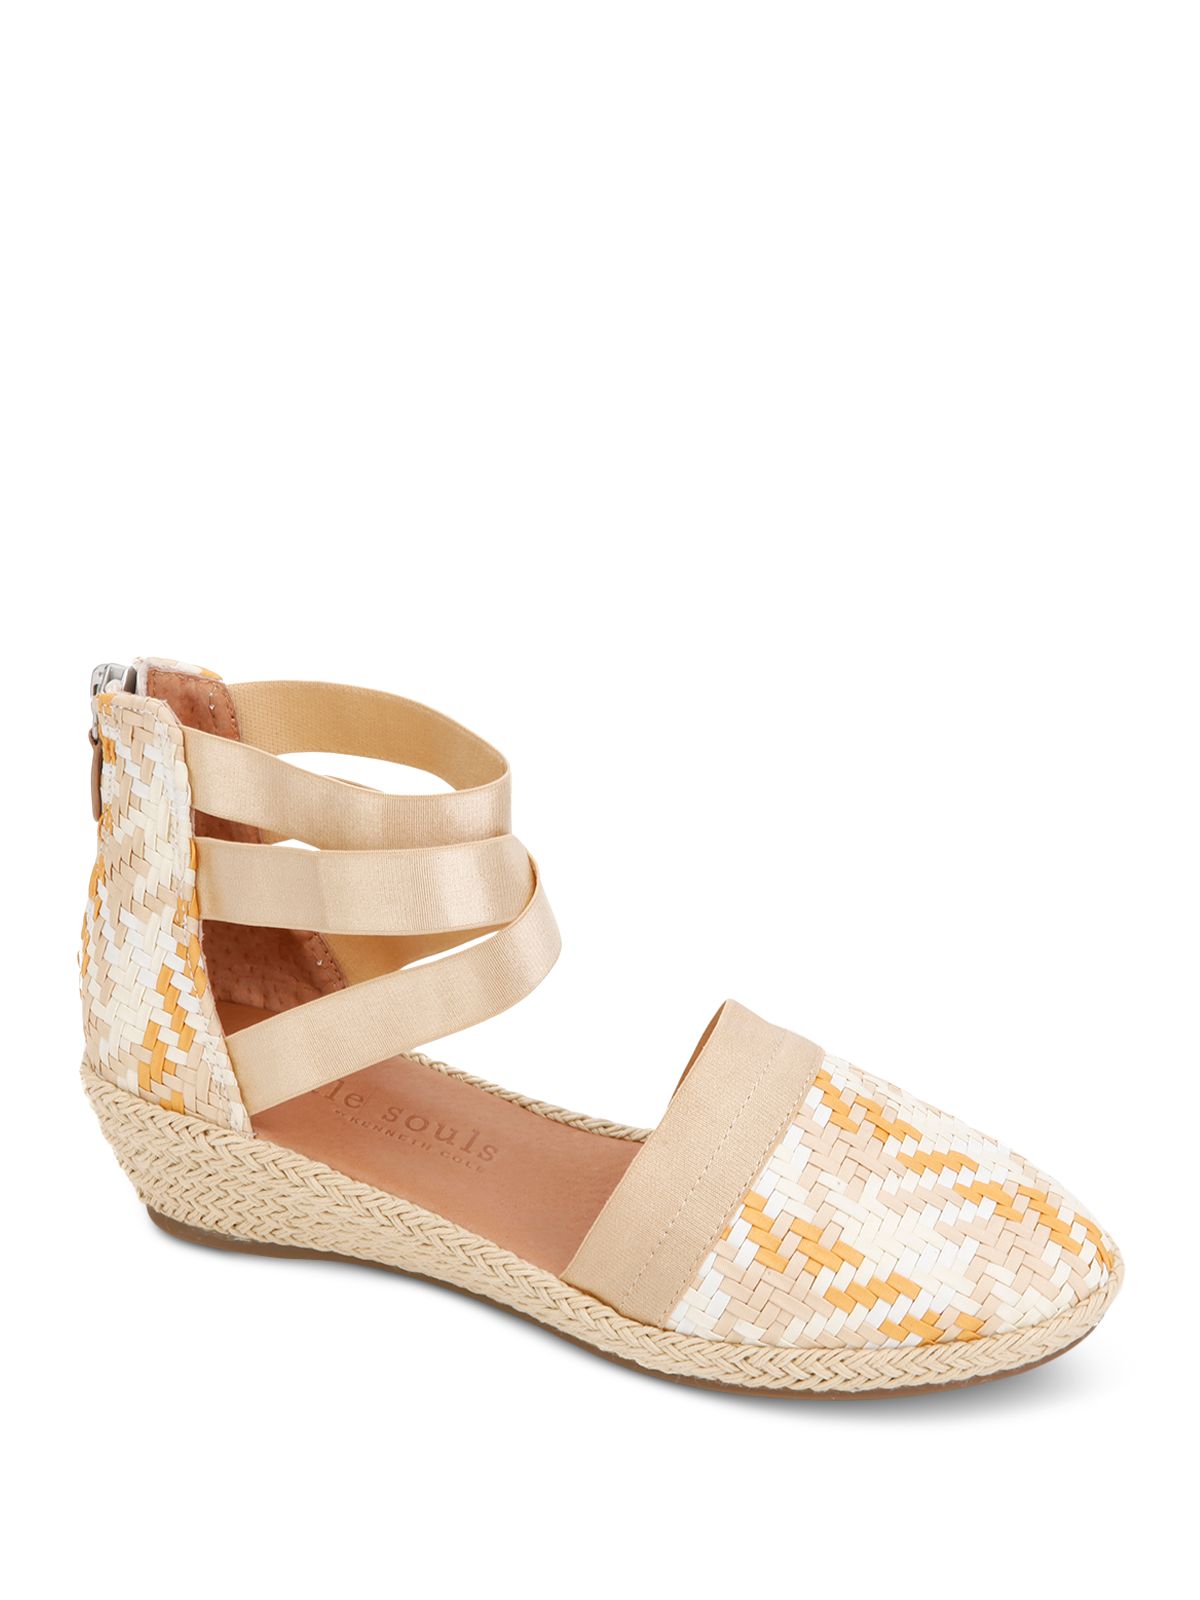 GENTLE SOULS KENNETH COLE Womens Beige Mixed Media Crisscross Elastic Straps Padded Woven Ankle Strap Noa-beth Round Toe Wedge Zip-Up Espadrille Shoes 9.5